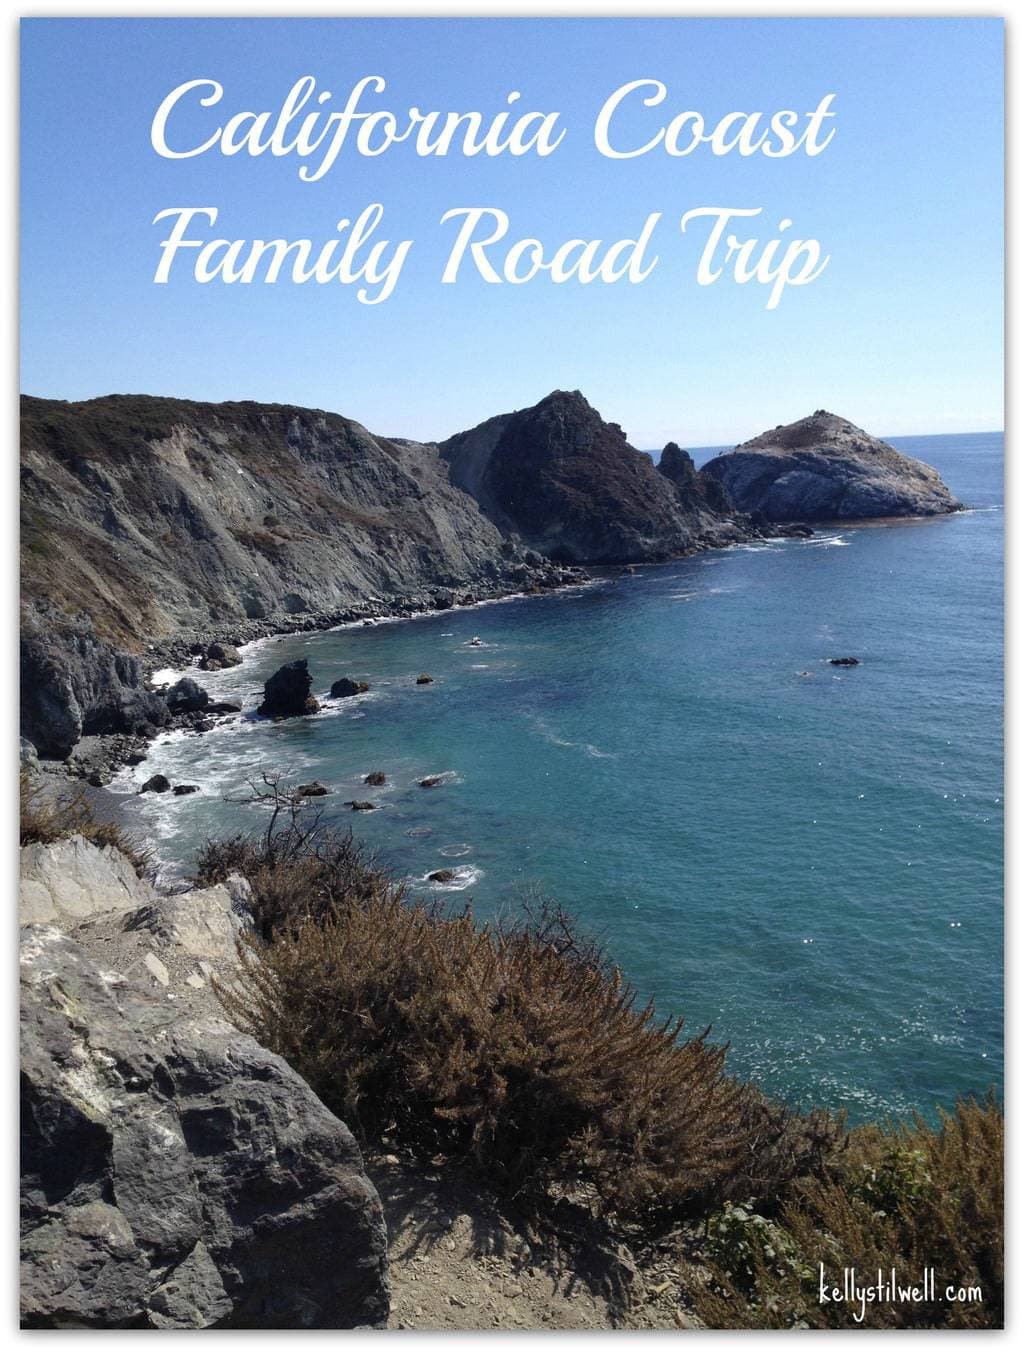 A few years ago we decided to take a California road trip with our girls. I love to travel internationally, but there is something special about a family road trip in the United States. There is so much to see right here in our beautiful country! 